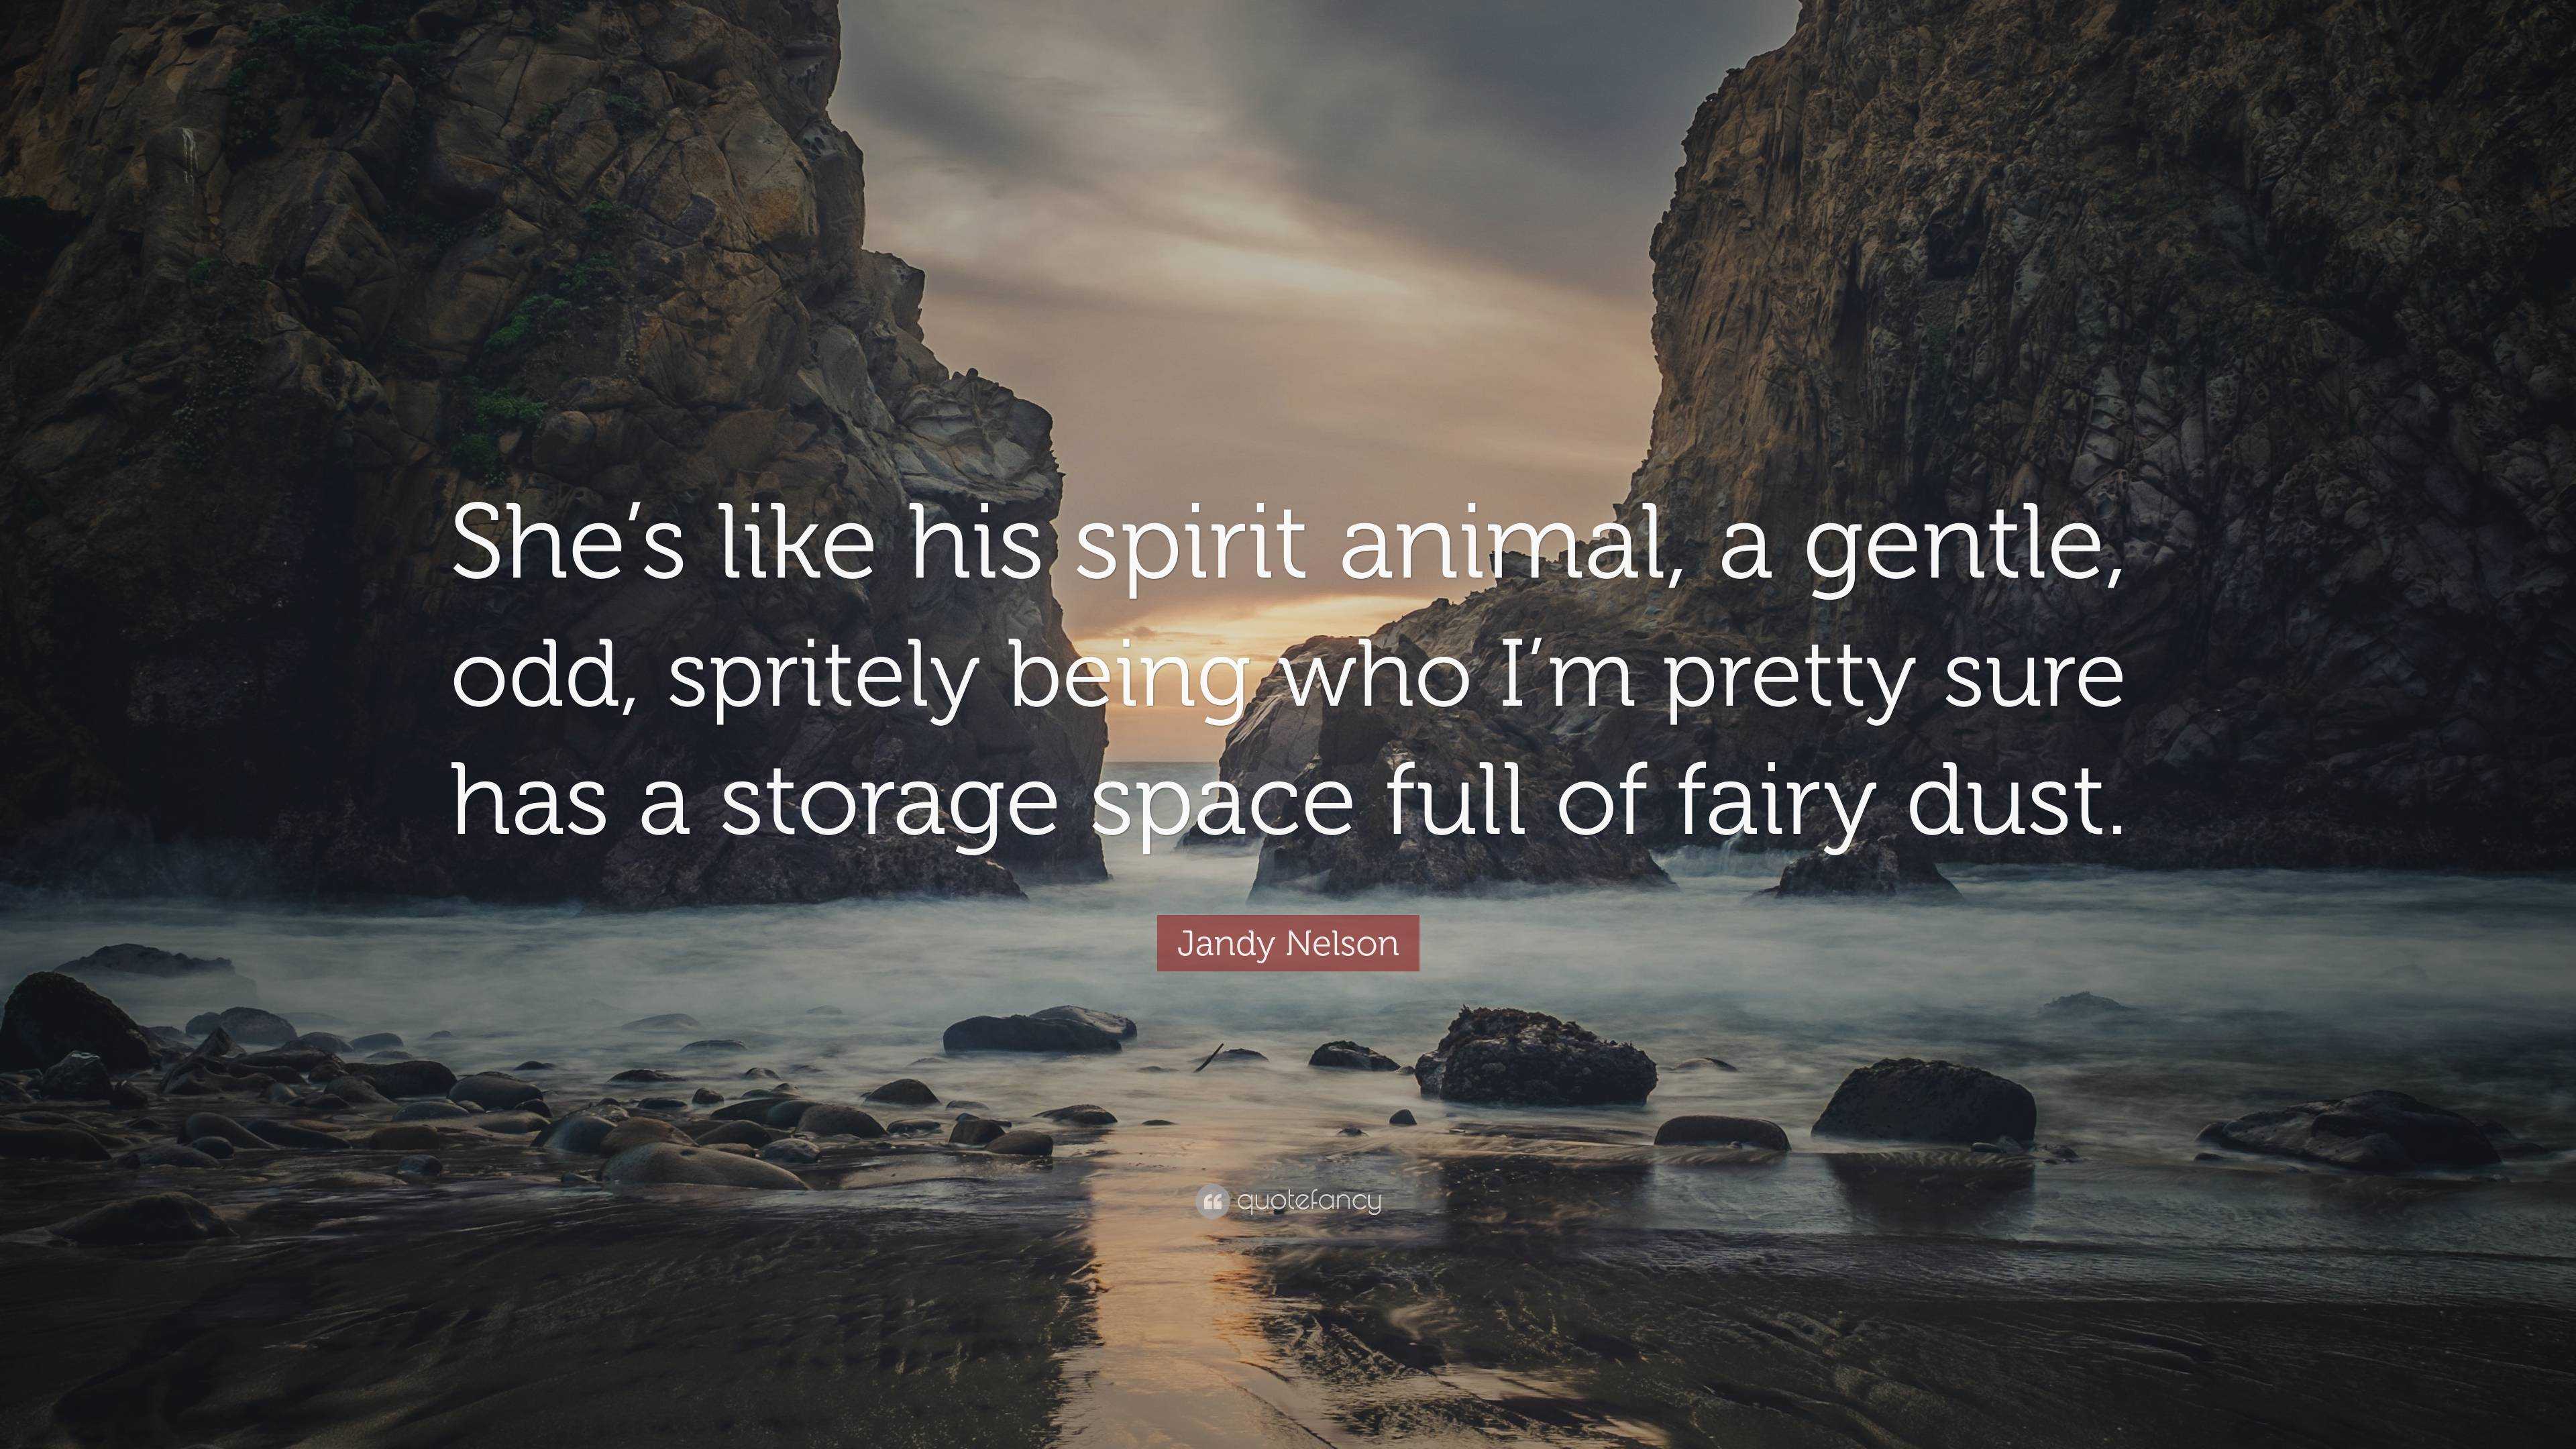 Jandy Nelson Quote: “She's like his spirit animal, a gentle, odd, spritely  being who I'm